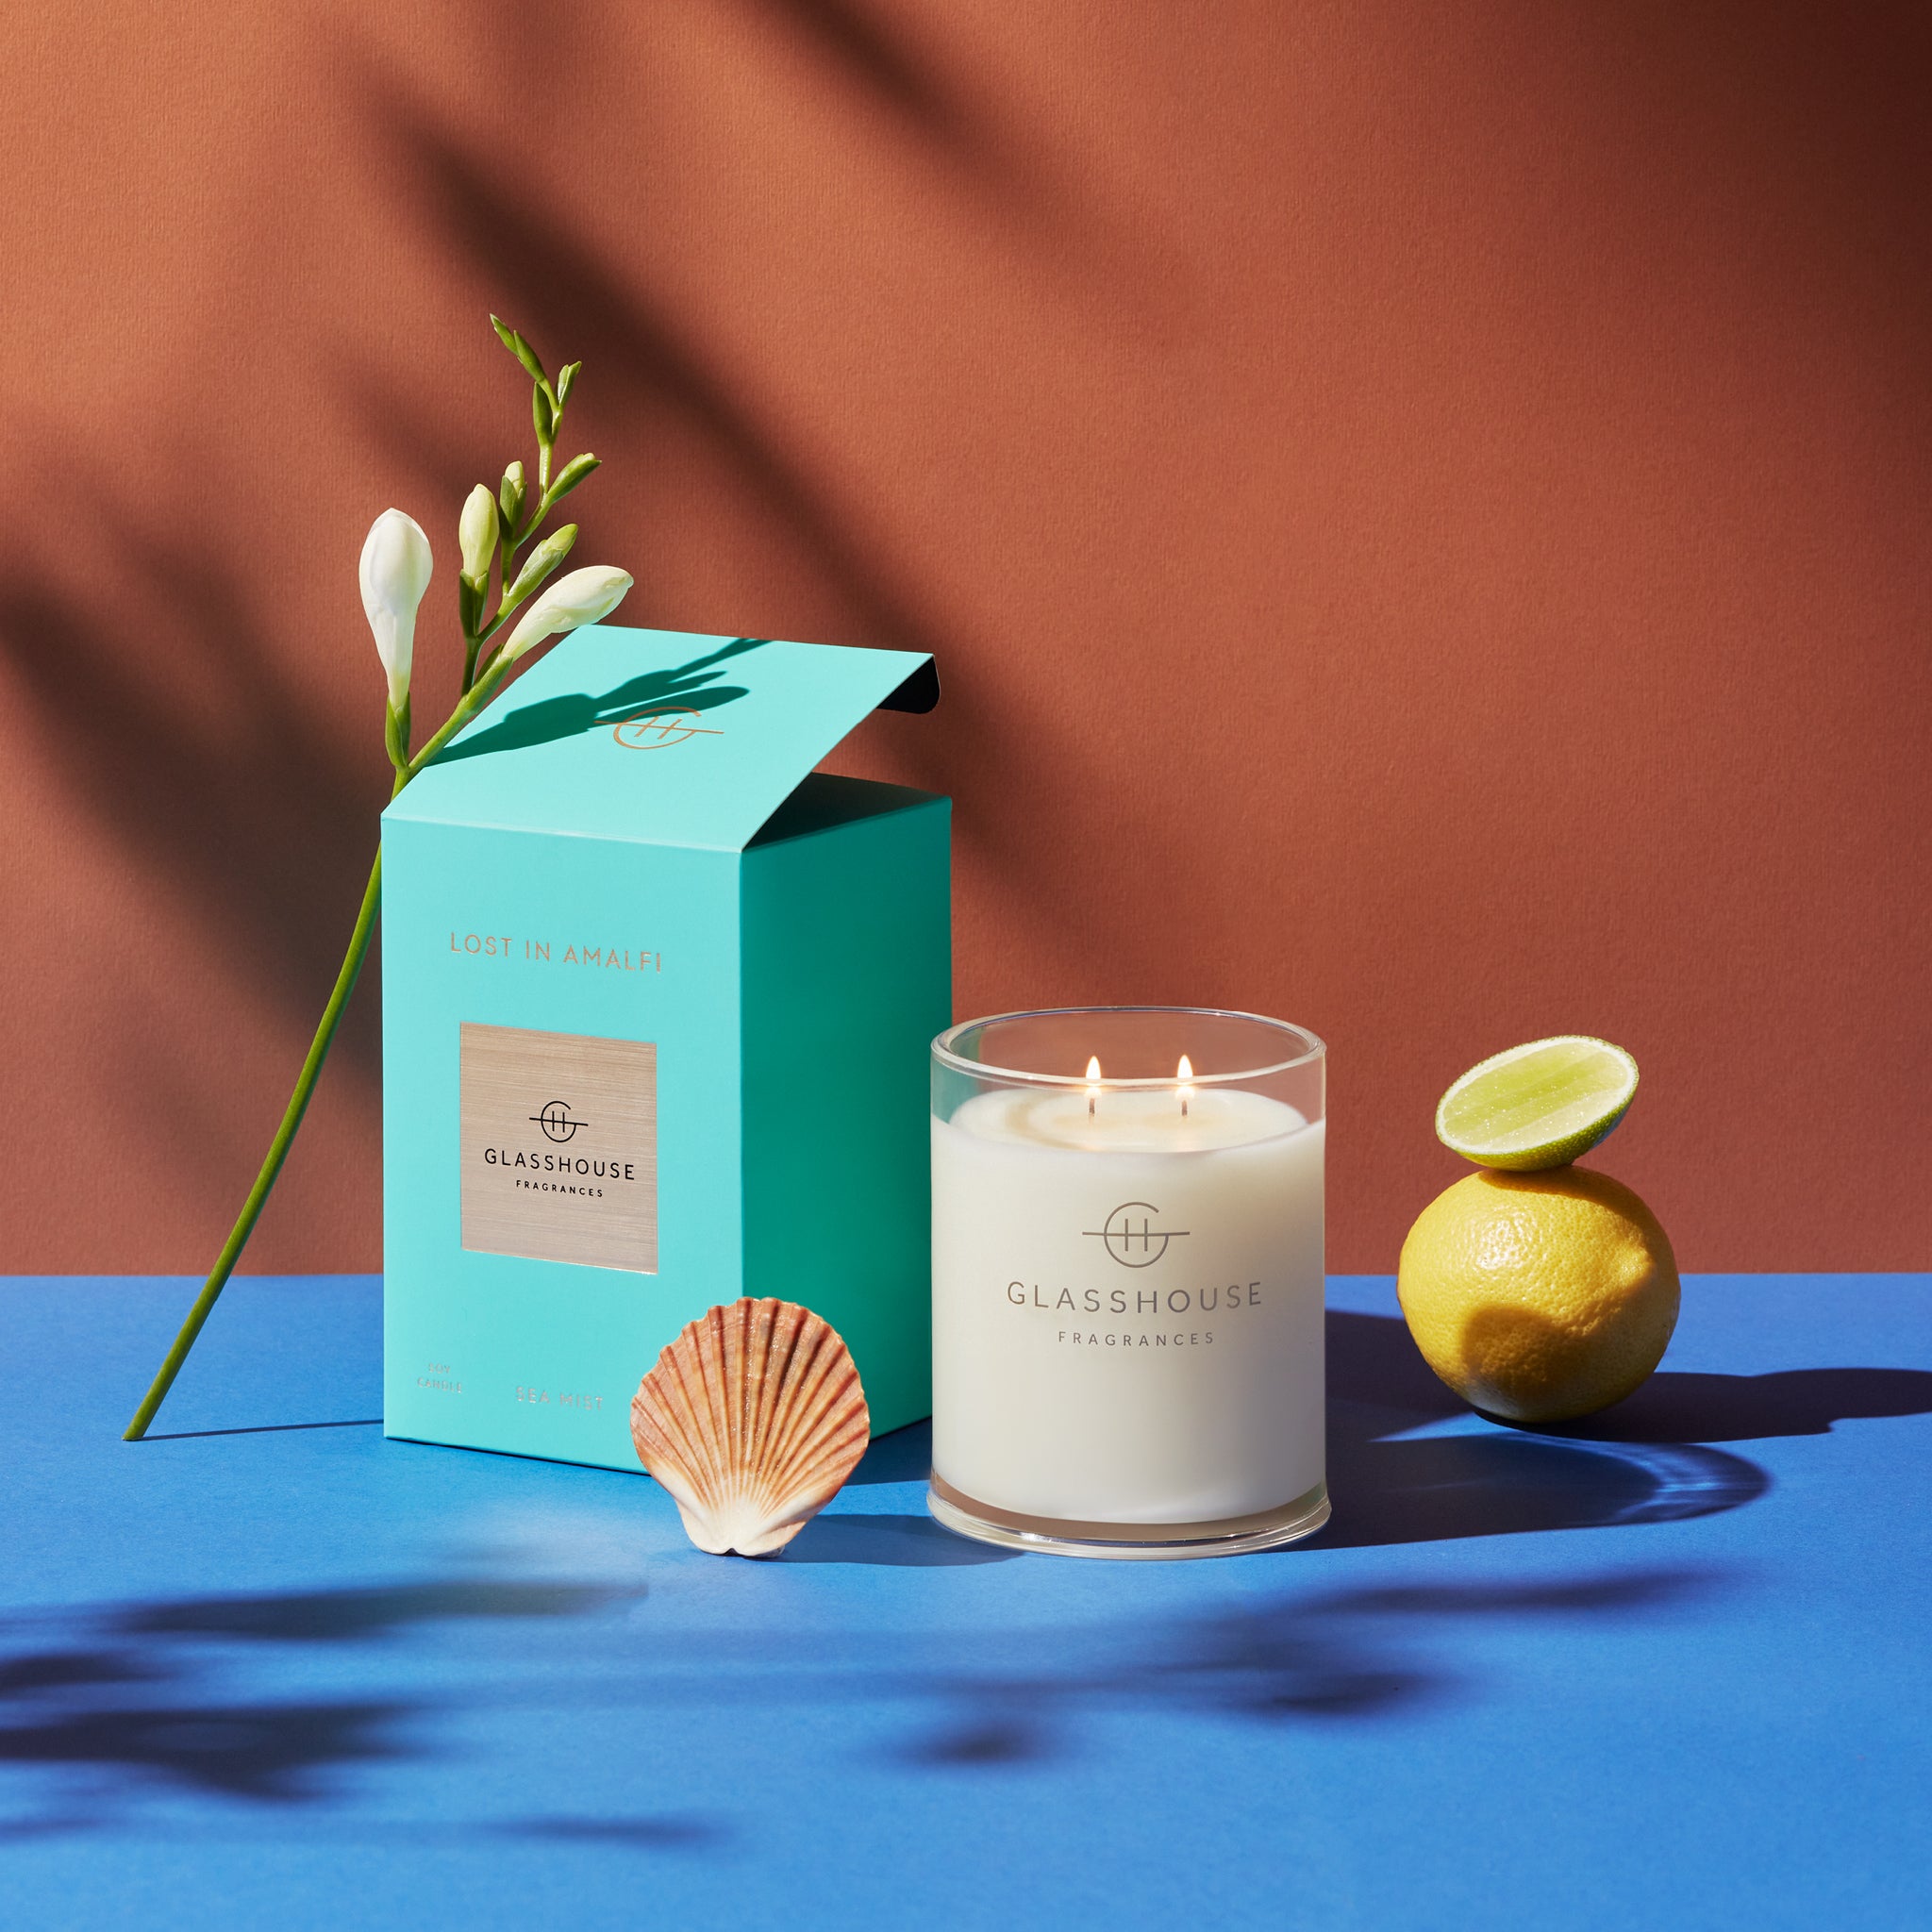 Lost in Amalfi - 380g Soy Candle | Glasshouse Fragrances ...